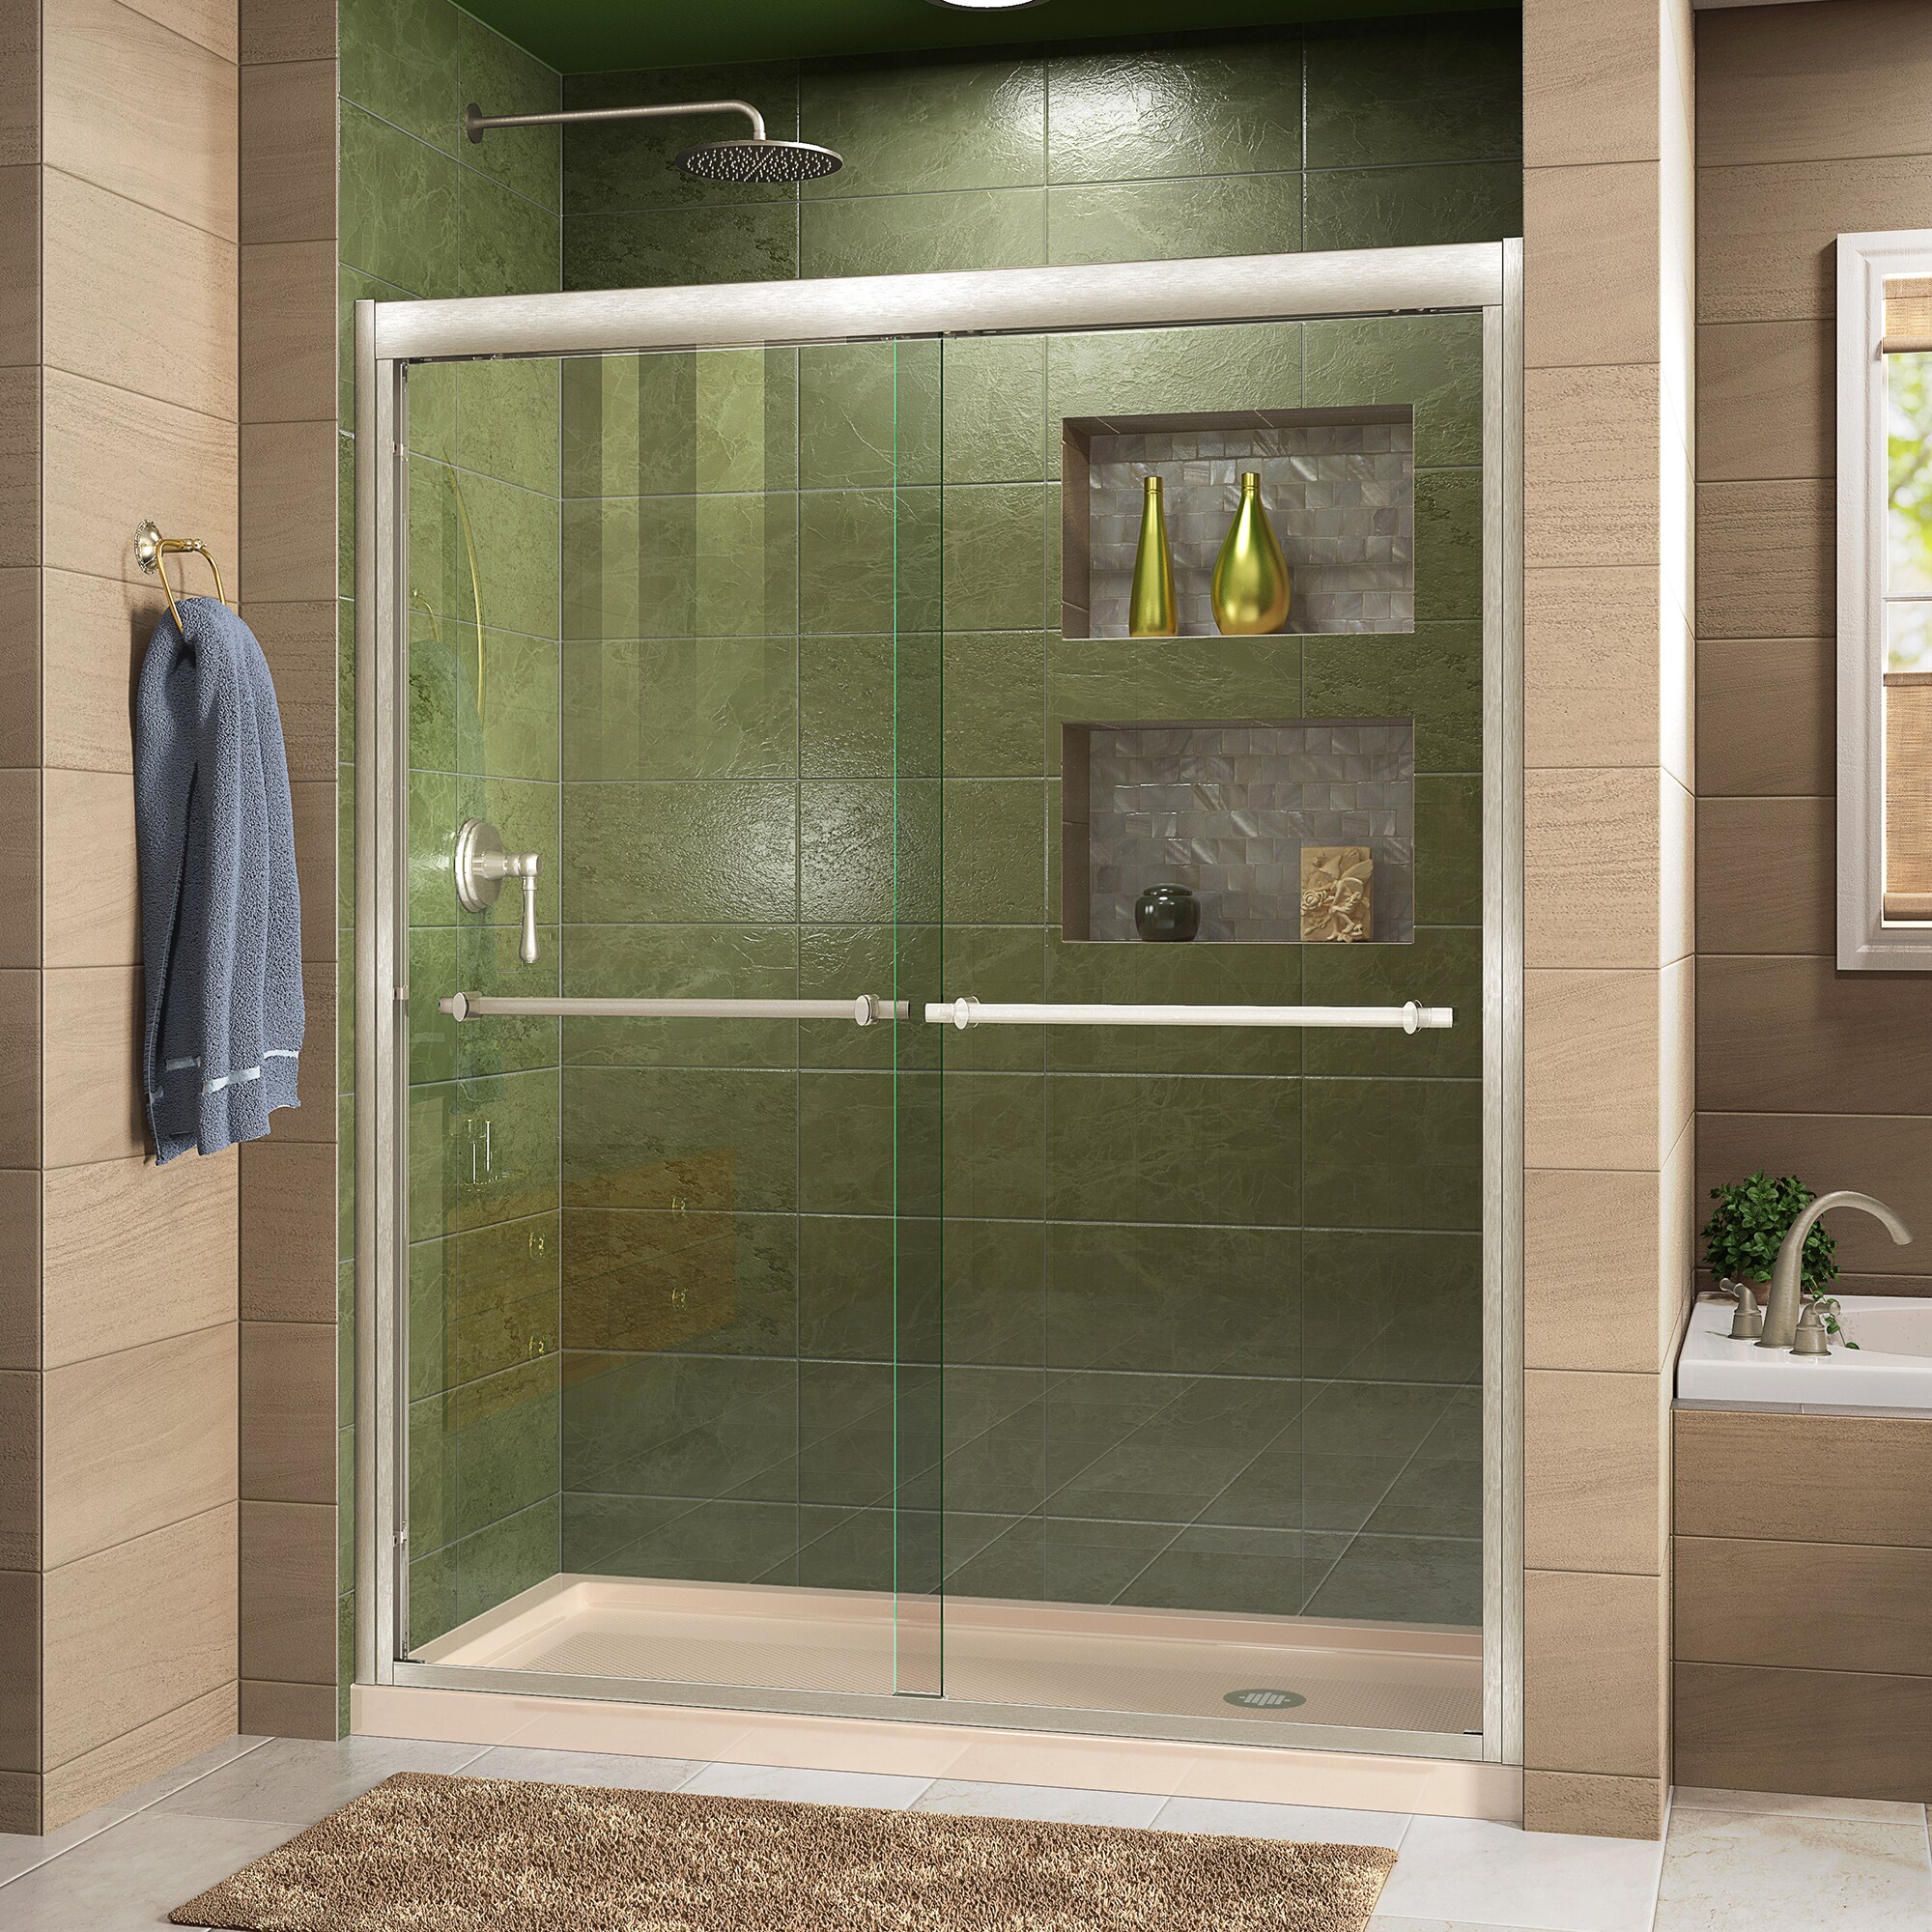 DreamLine Duet Biscuit 2-Piece 30-in x 60-in x 75-in Rectangular Alcove Shower Kit (Right Drain) with Base and Door Included